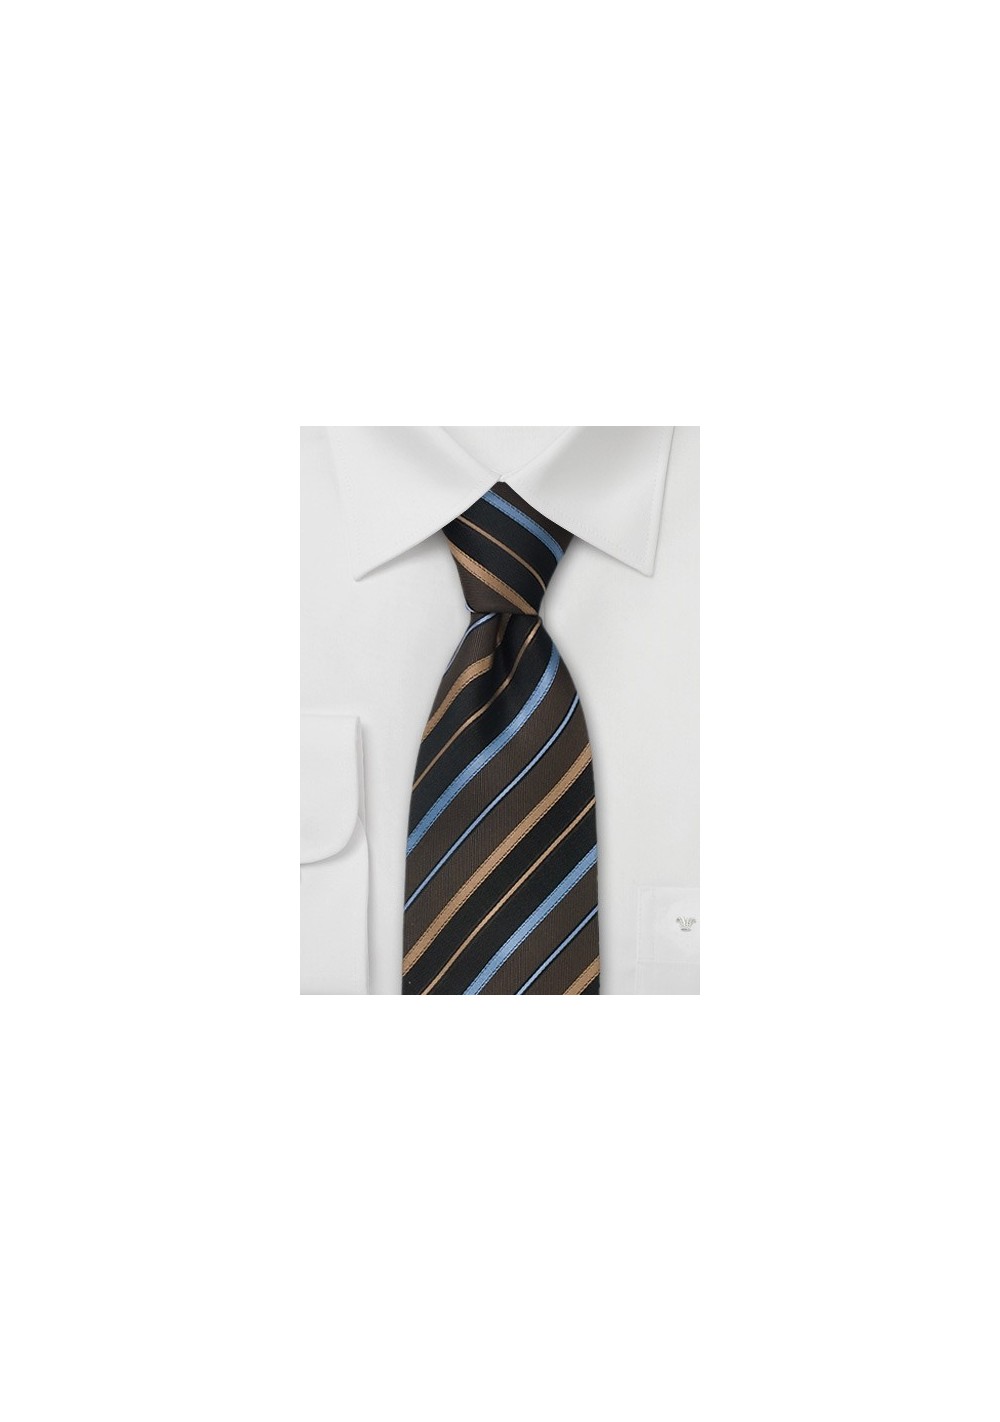 Extra Long tie - Necktie with modern diagonal stripes in XL length